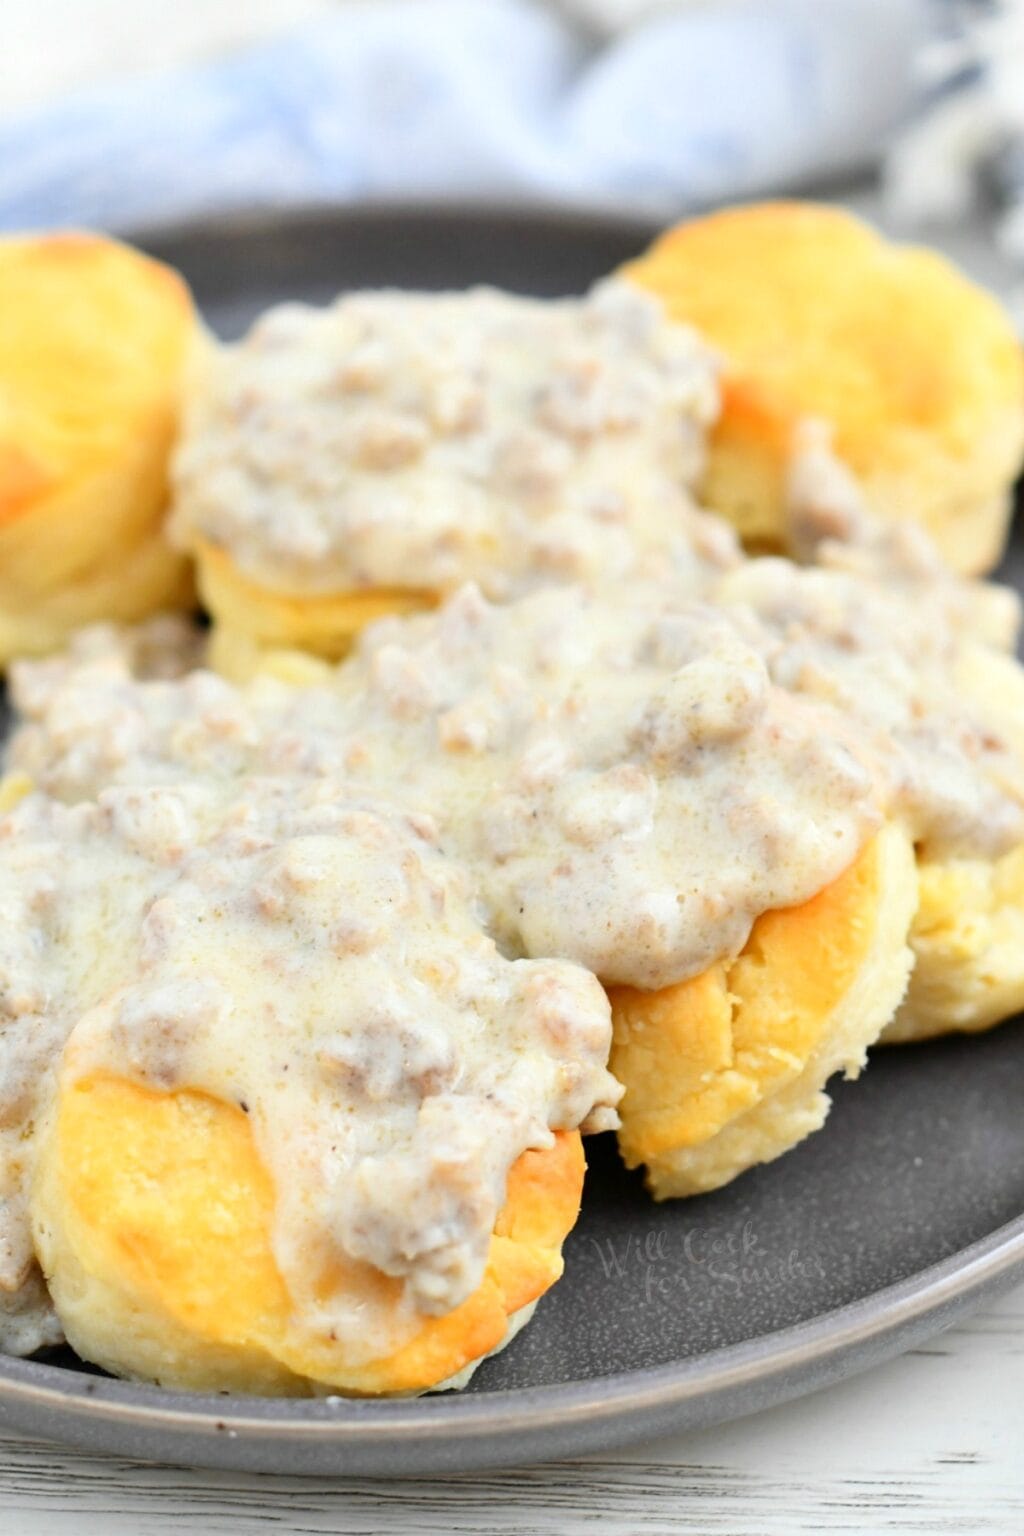 Biscuits and Gravy - Super Easy Buttermilk Biscuits and Sausage Gravy